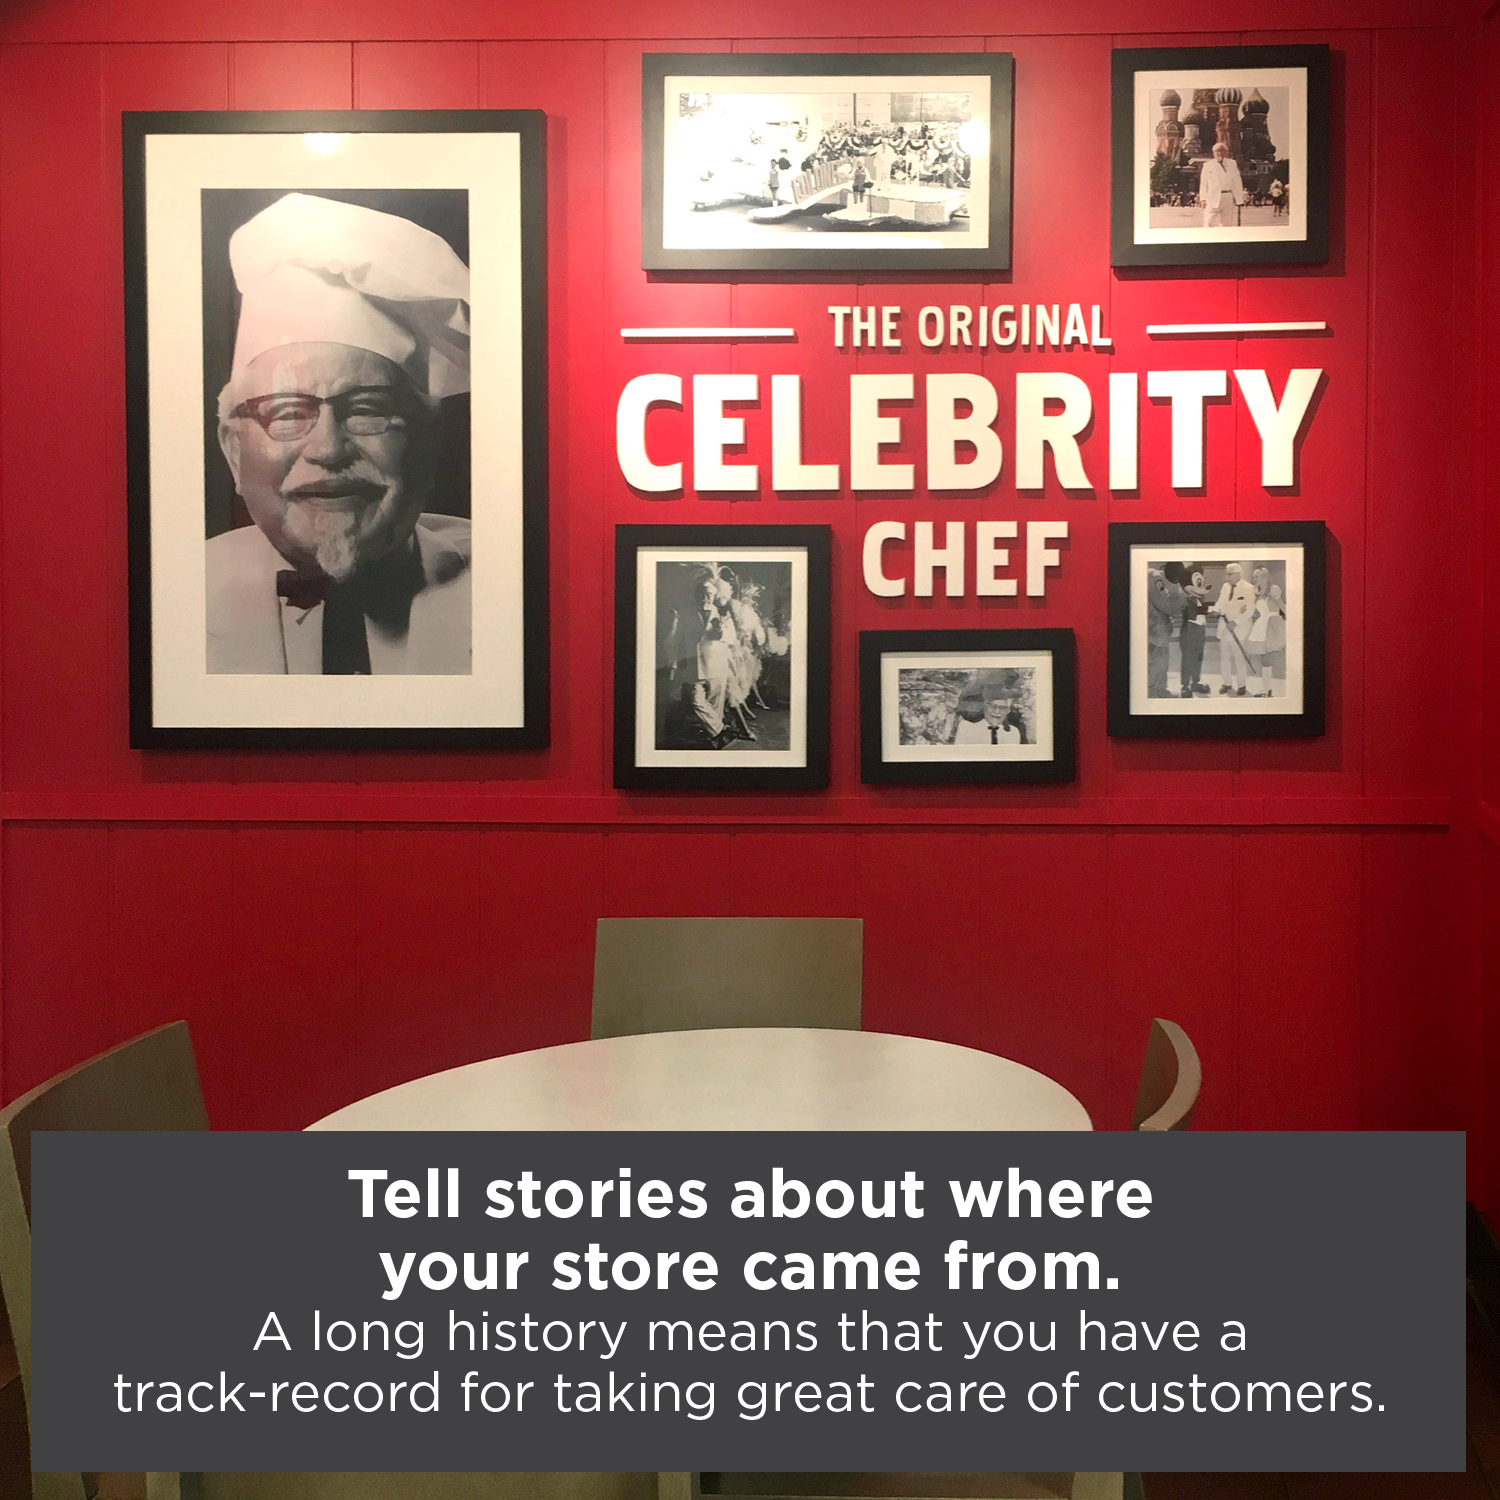 Tell stories about where your store came from.